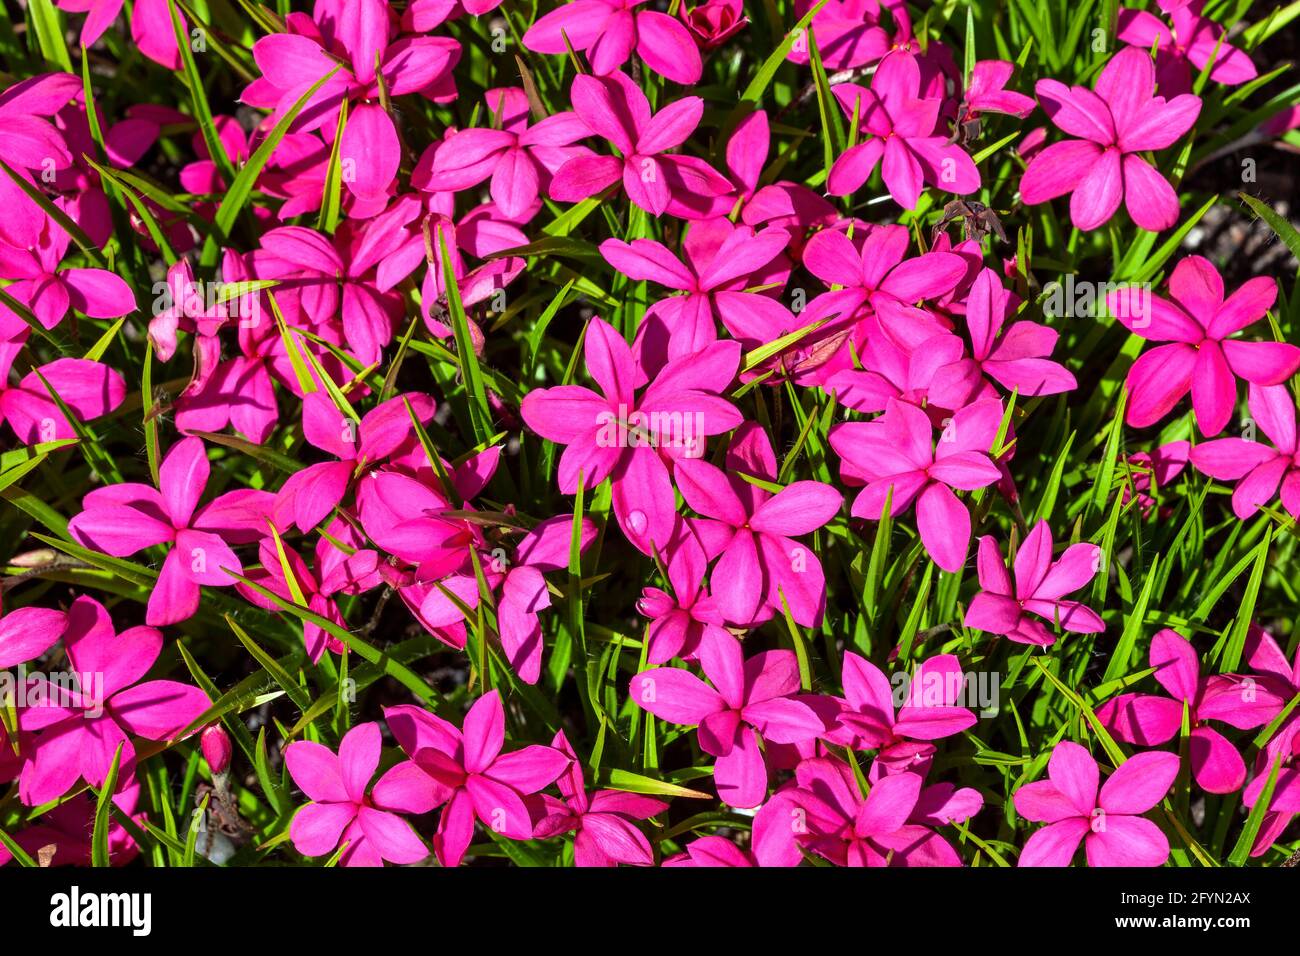 Rhodohypoxis milloides 'Claret' a flowering bulbous plant with a pink red springtime flower commonly known as spring starflower, stock photo image Stock Photo